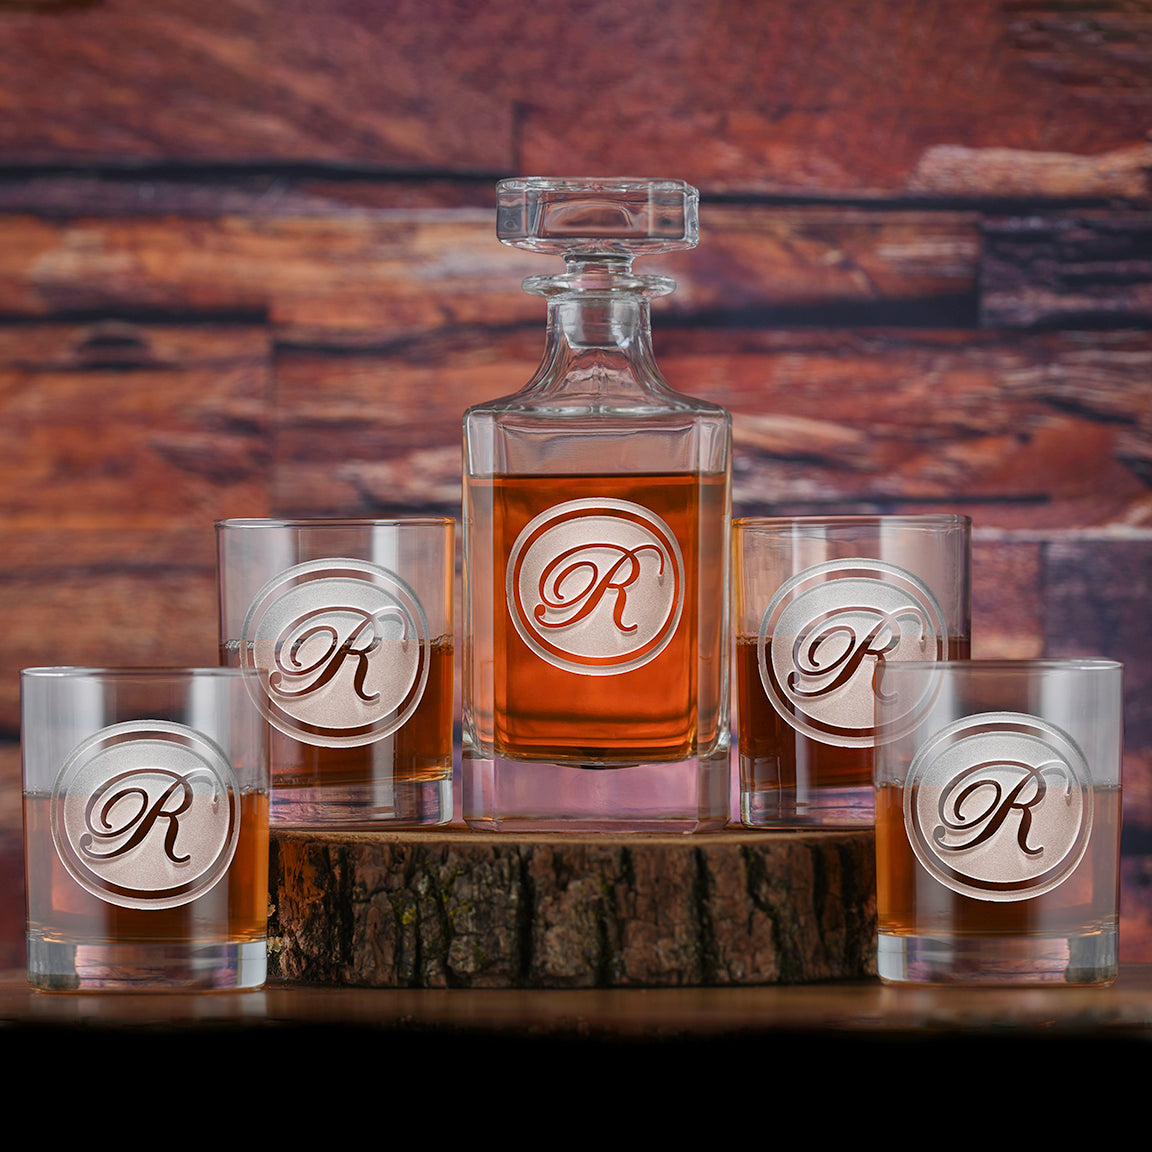 Whiskey Lovers Set – Ten Acre Gifts